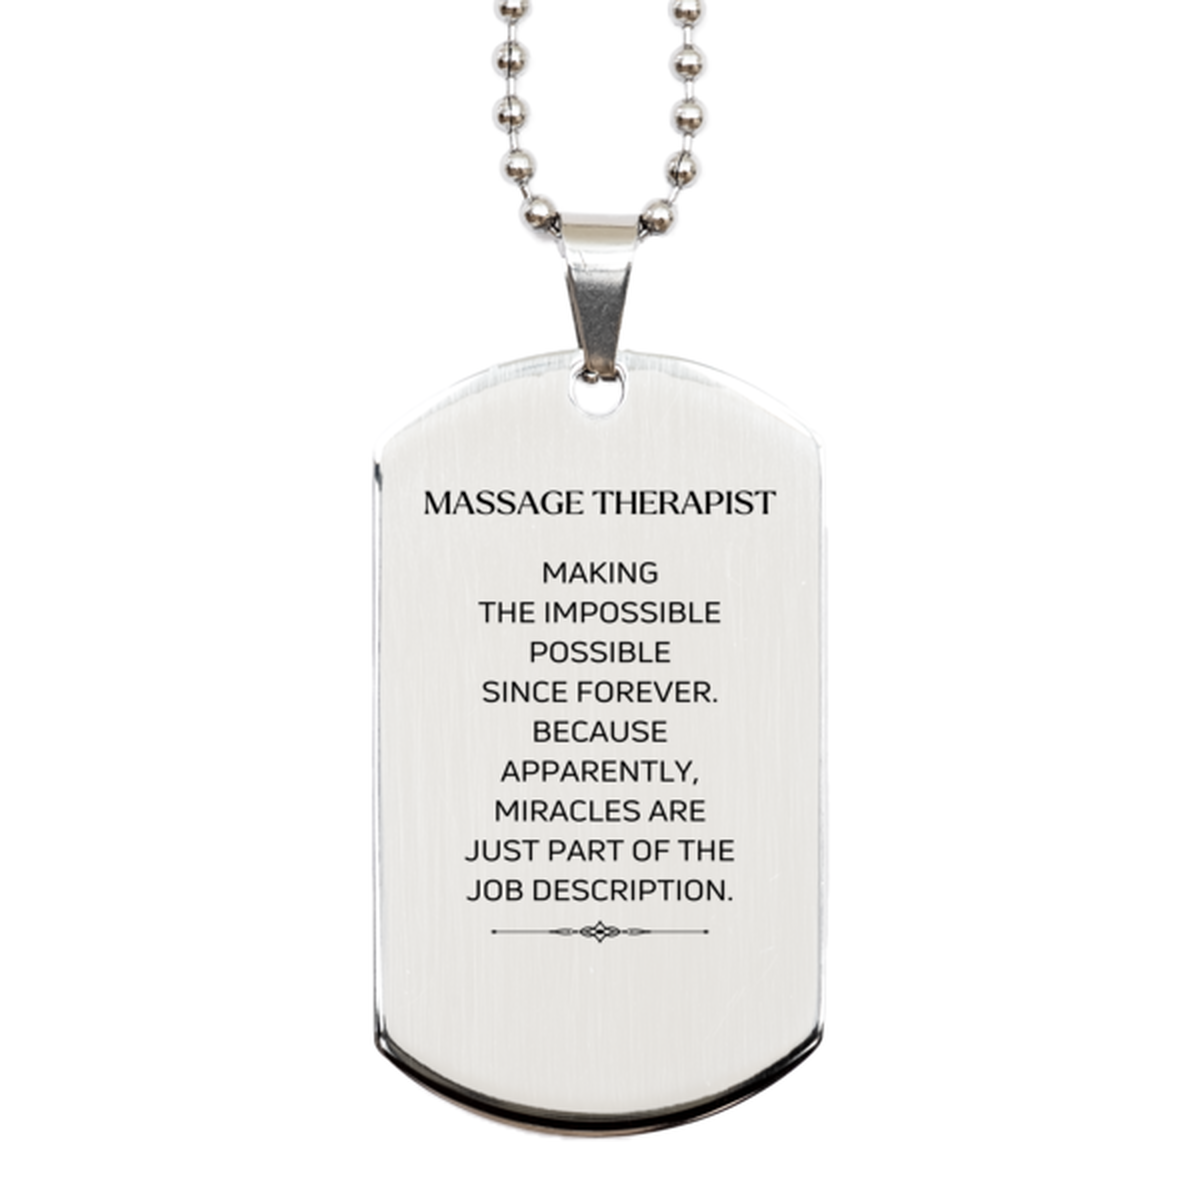 Funny Massage Therapist Gifts, Miracles are just part of the job description, Inspirational Birthday Silver Dog Tag For Massage Therapist, Men, Women, Coworkers, Friends, Boss